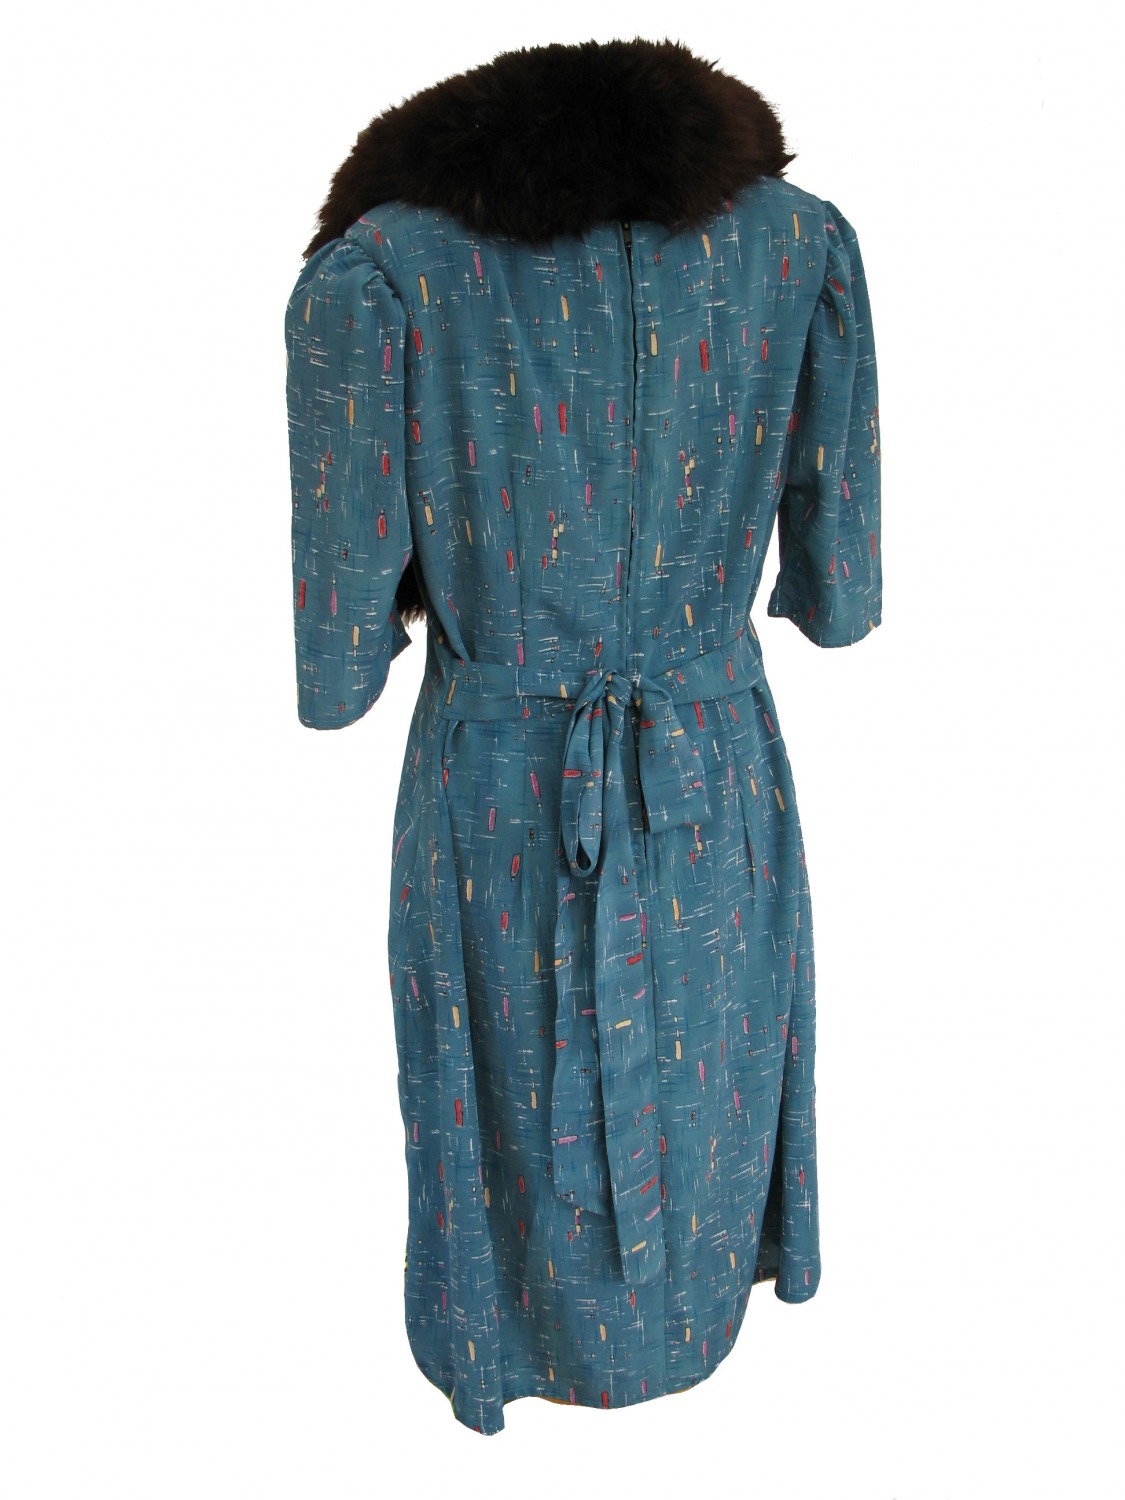 Ladies 1940s Wartime Costume Size 18 - 20 Image